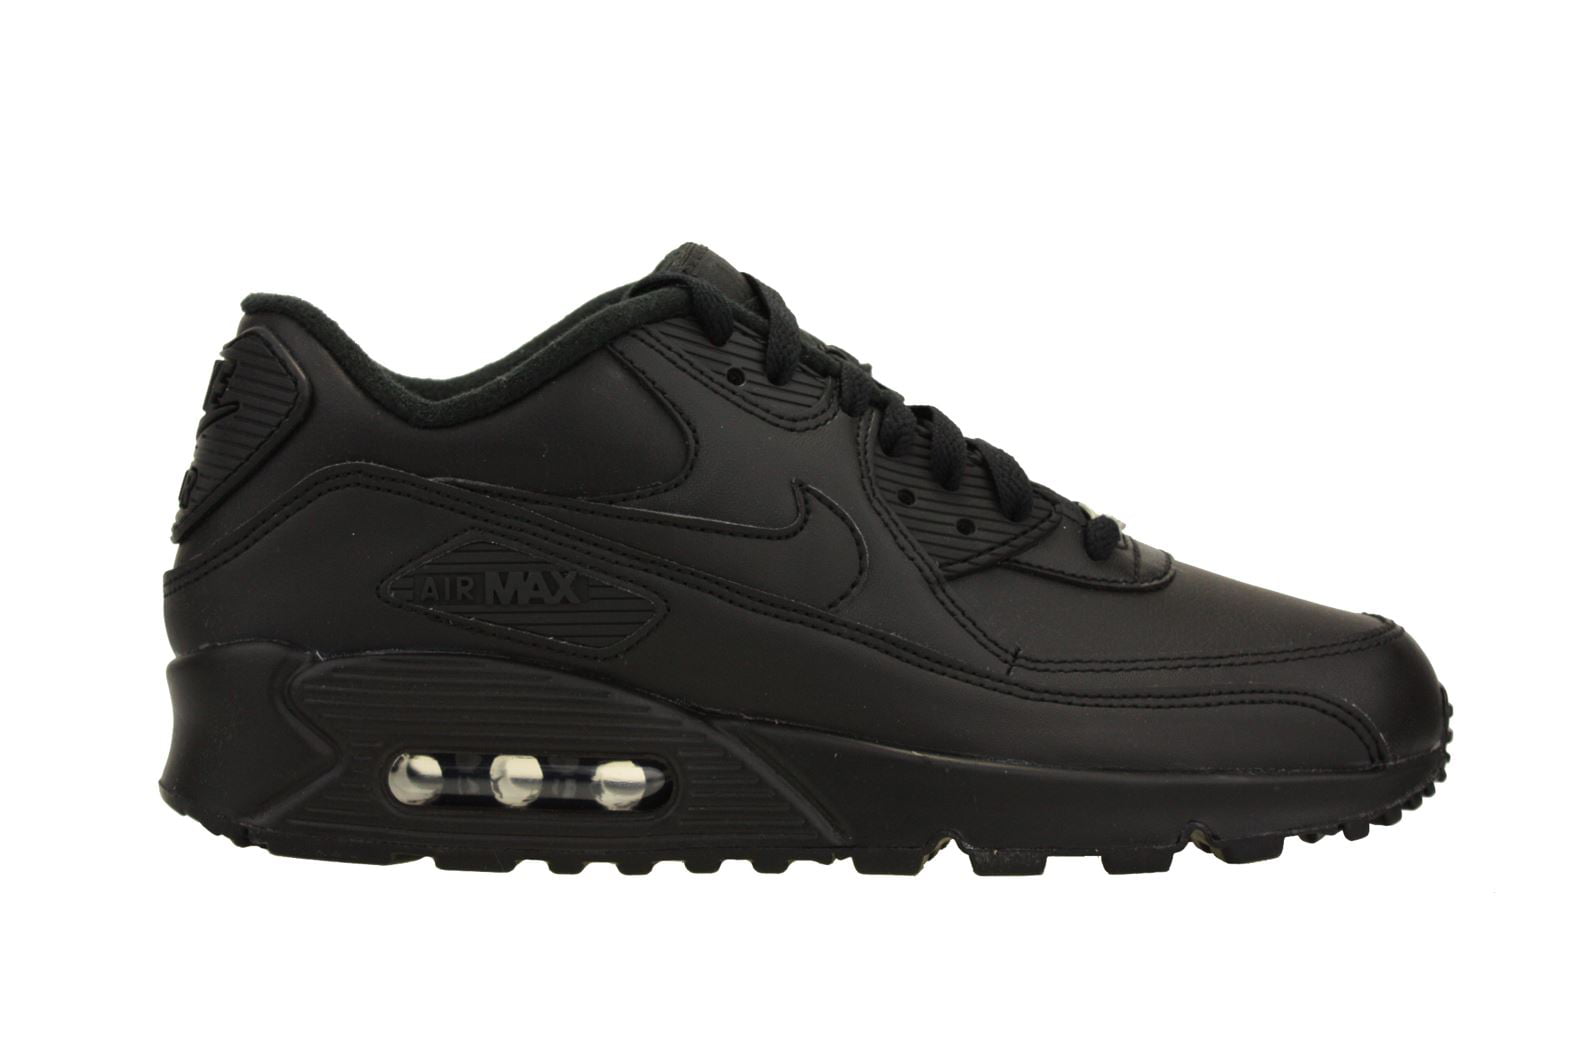 Nike Men's Air Max 90 Leather Running Shoes (12) - Walmart.com